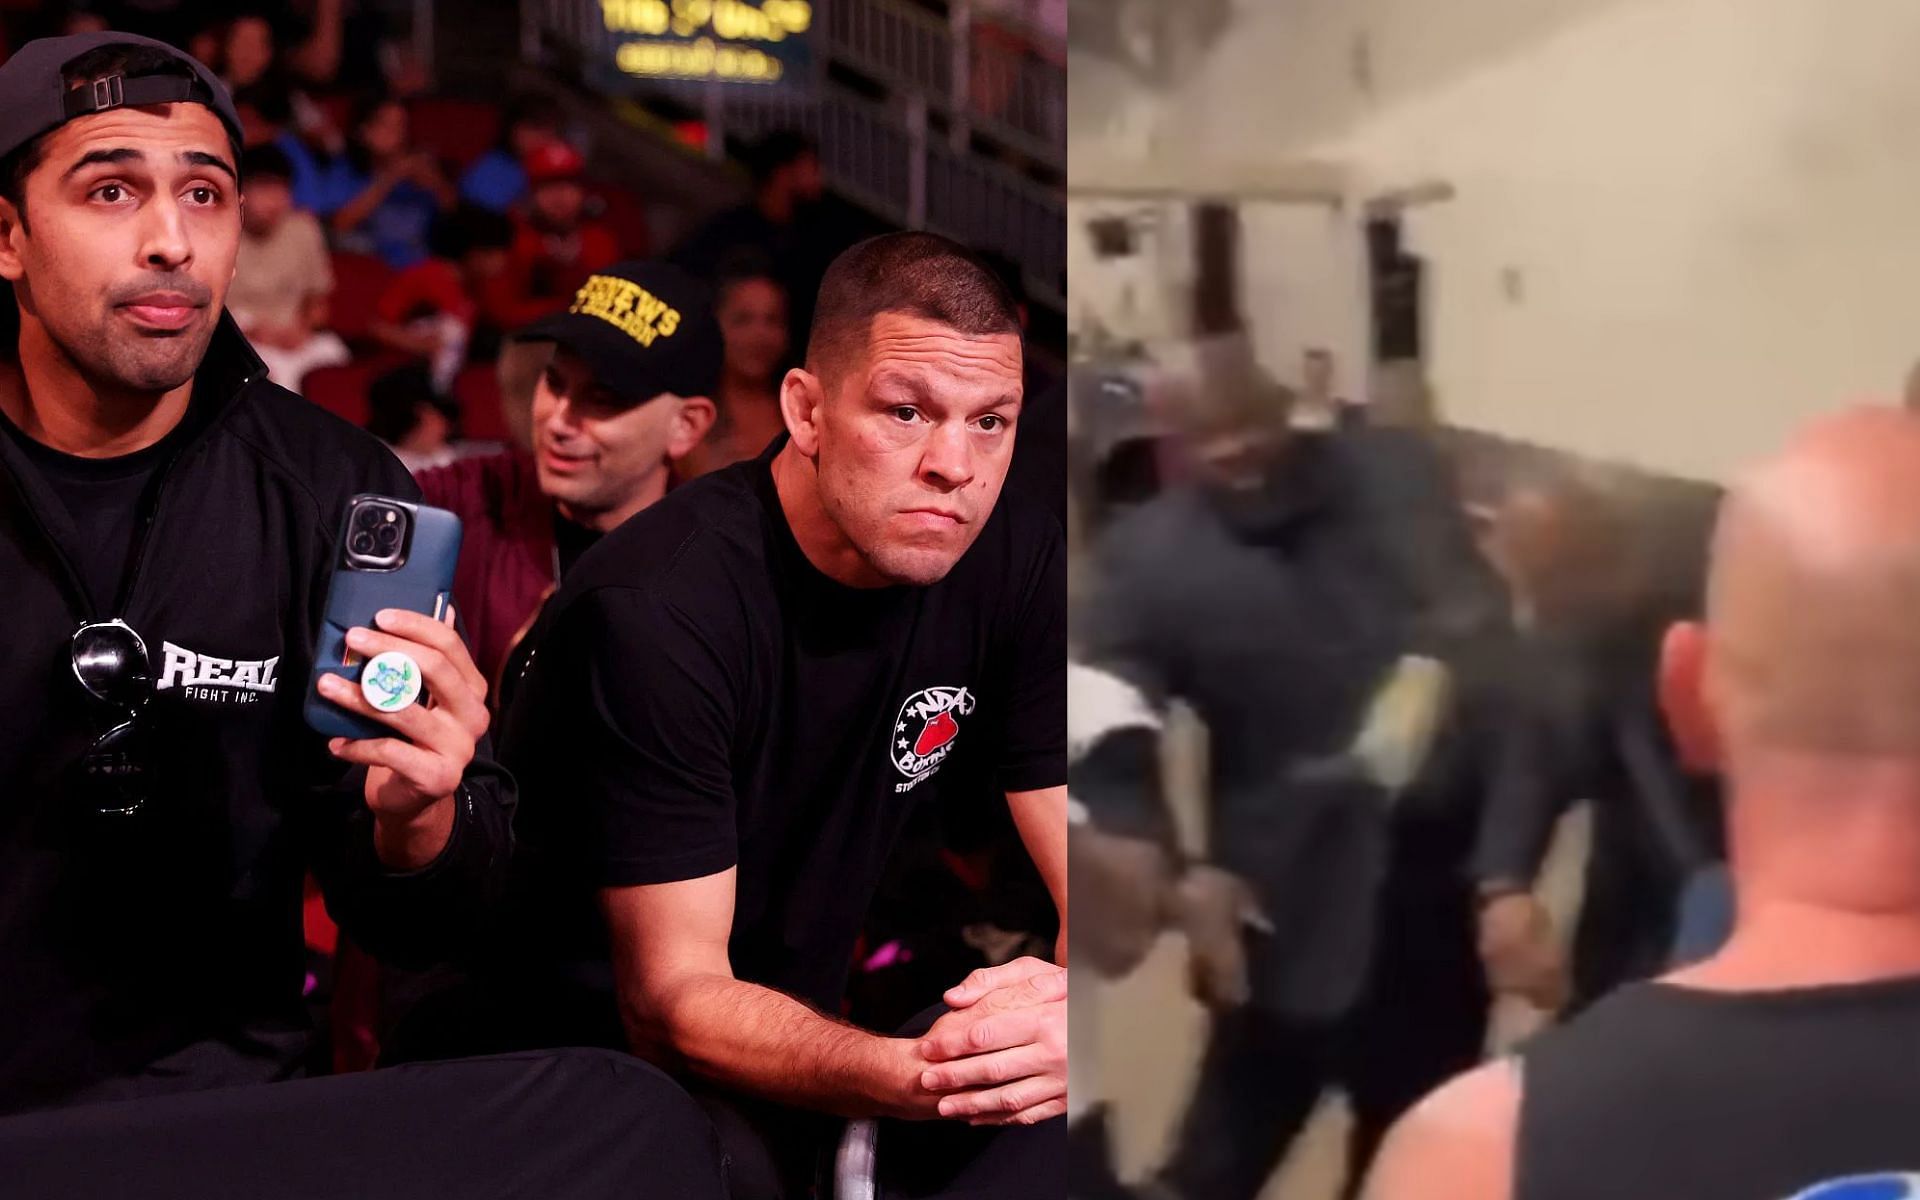 Nate Diaz and team (left) and footage of backstage incident (right) [Image courtesy:@insidefighting on YouTube]